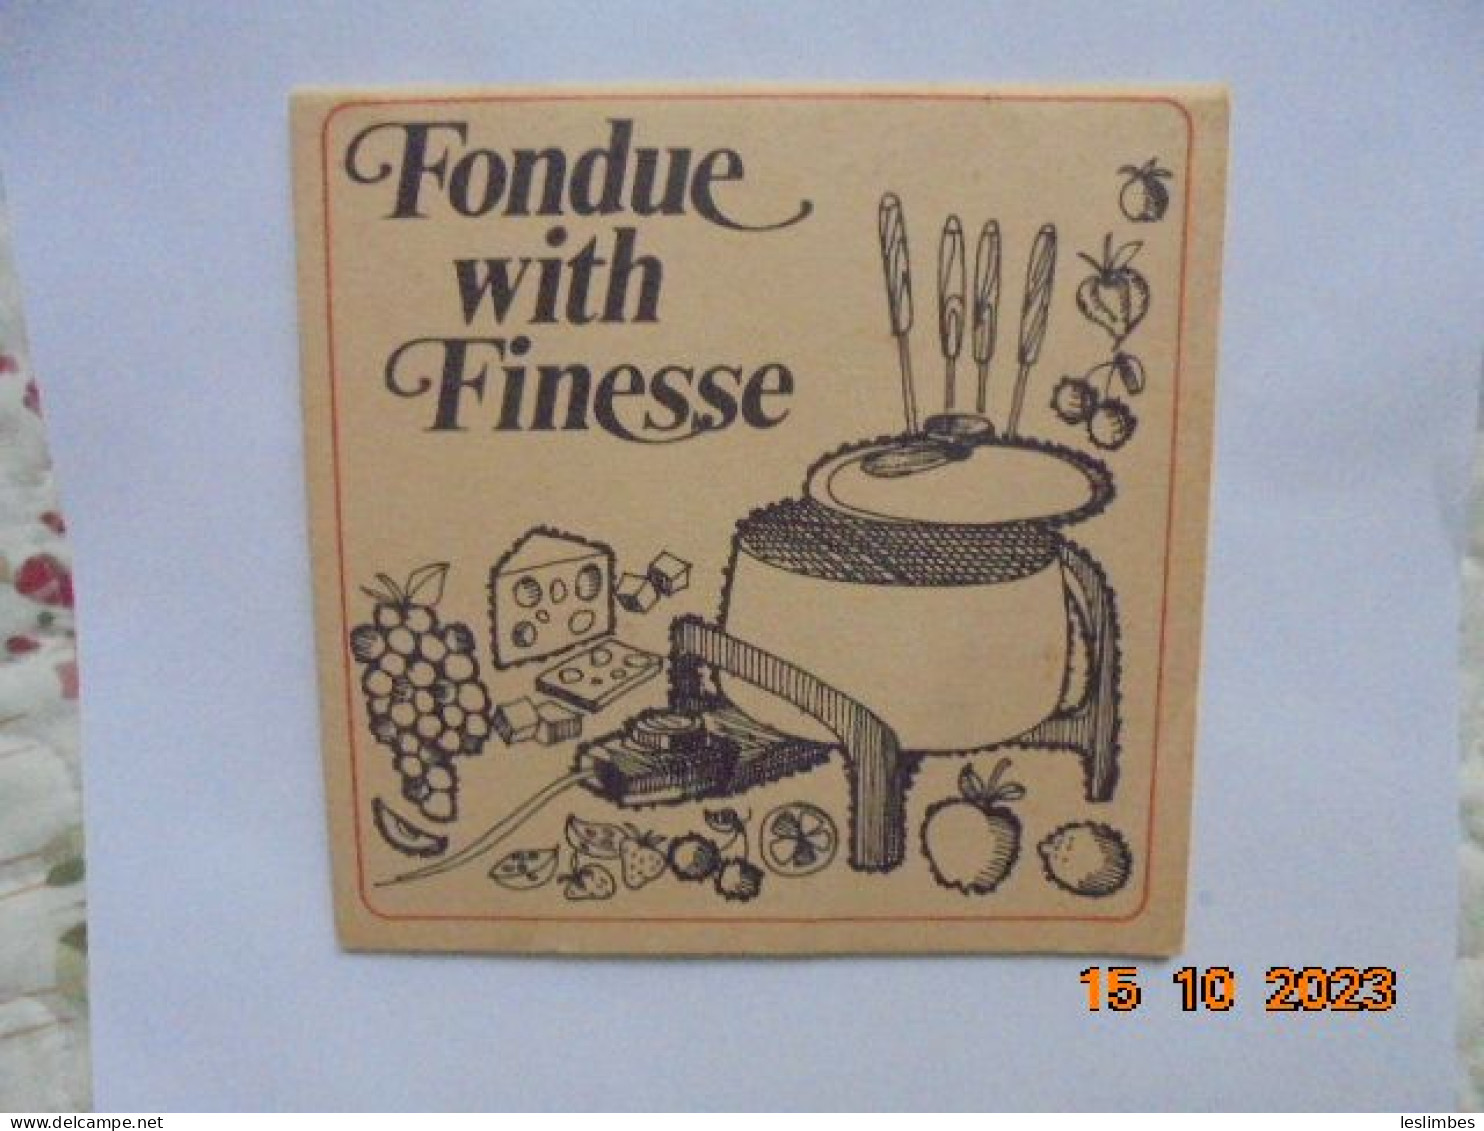 Fondue With Finesse - West Bend, 1970 - American (US)